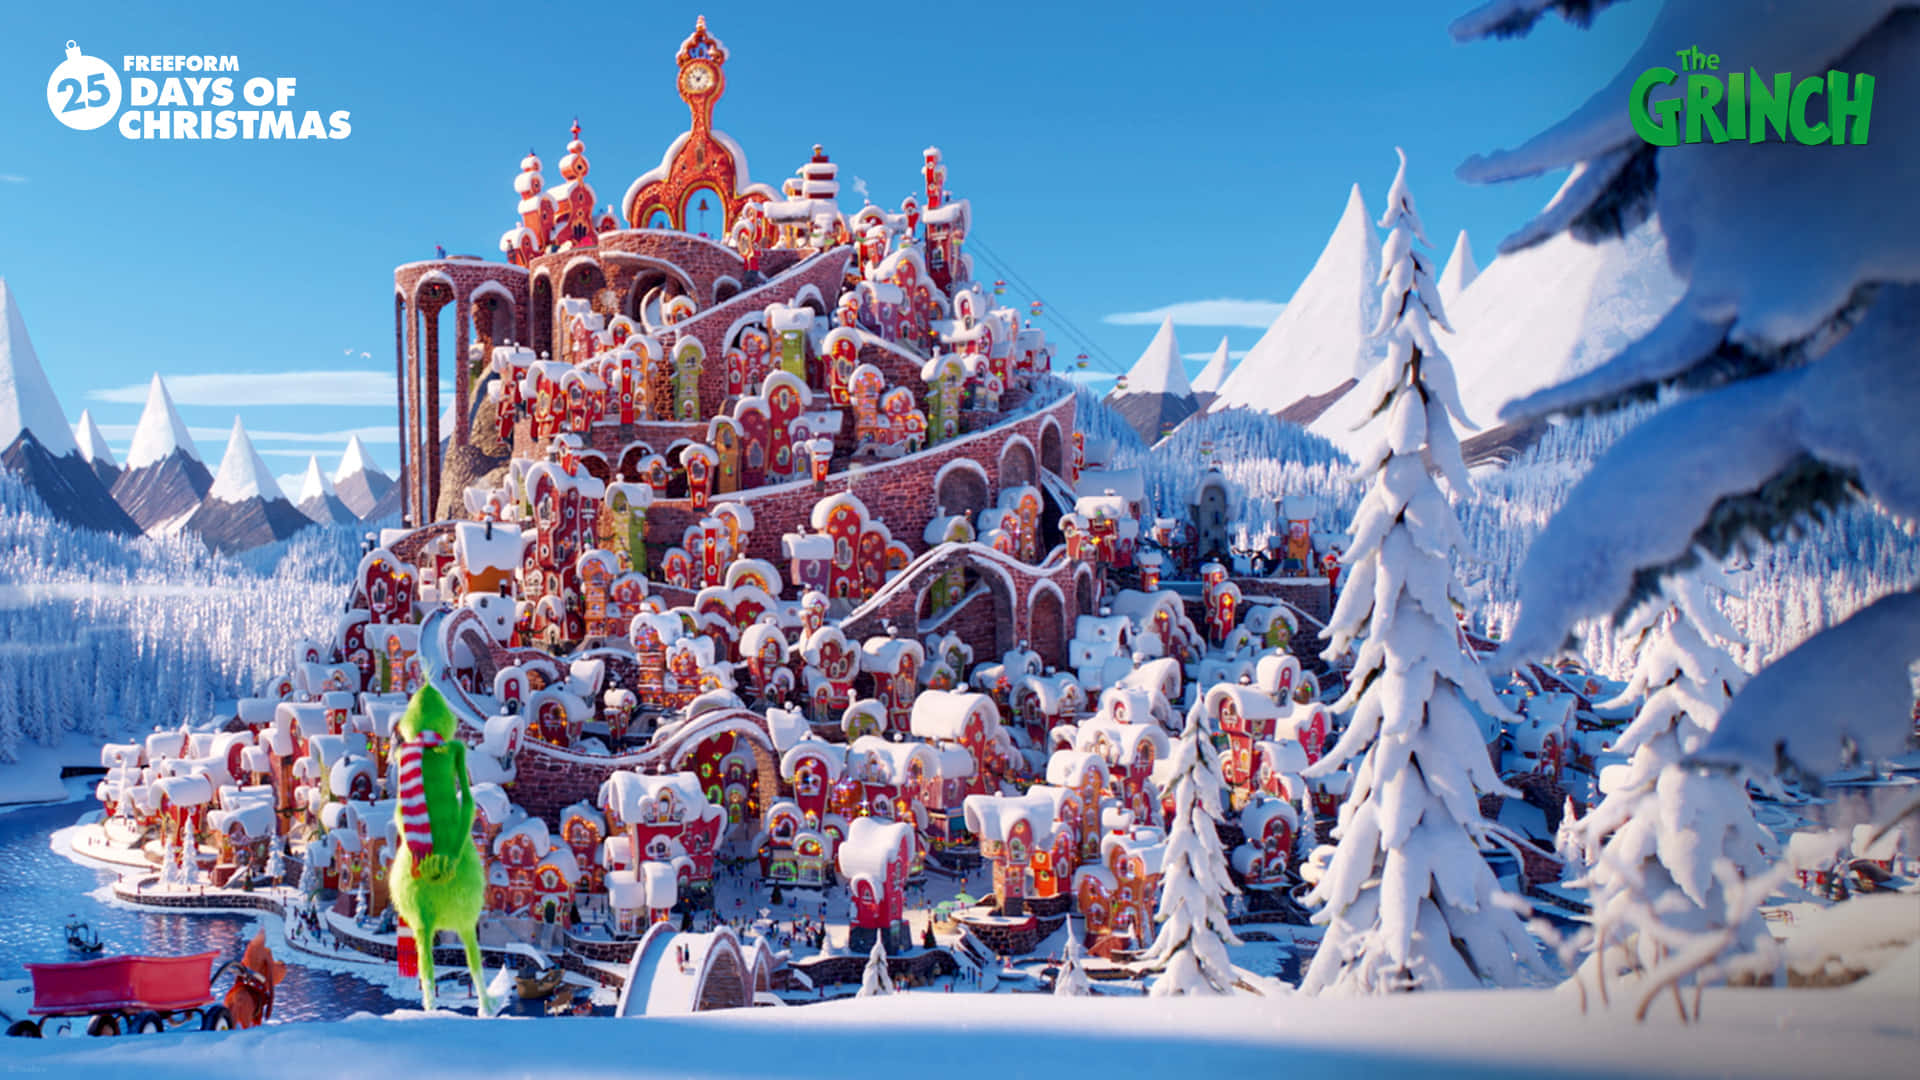 Welcome to Whoville!